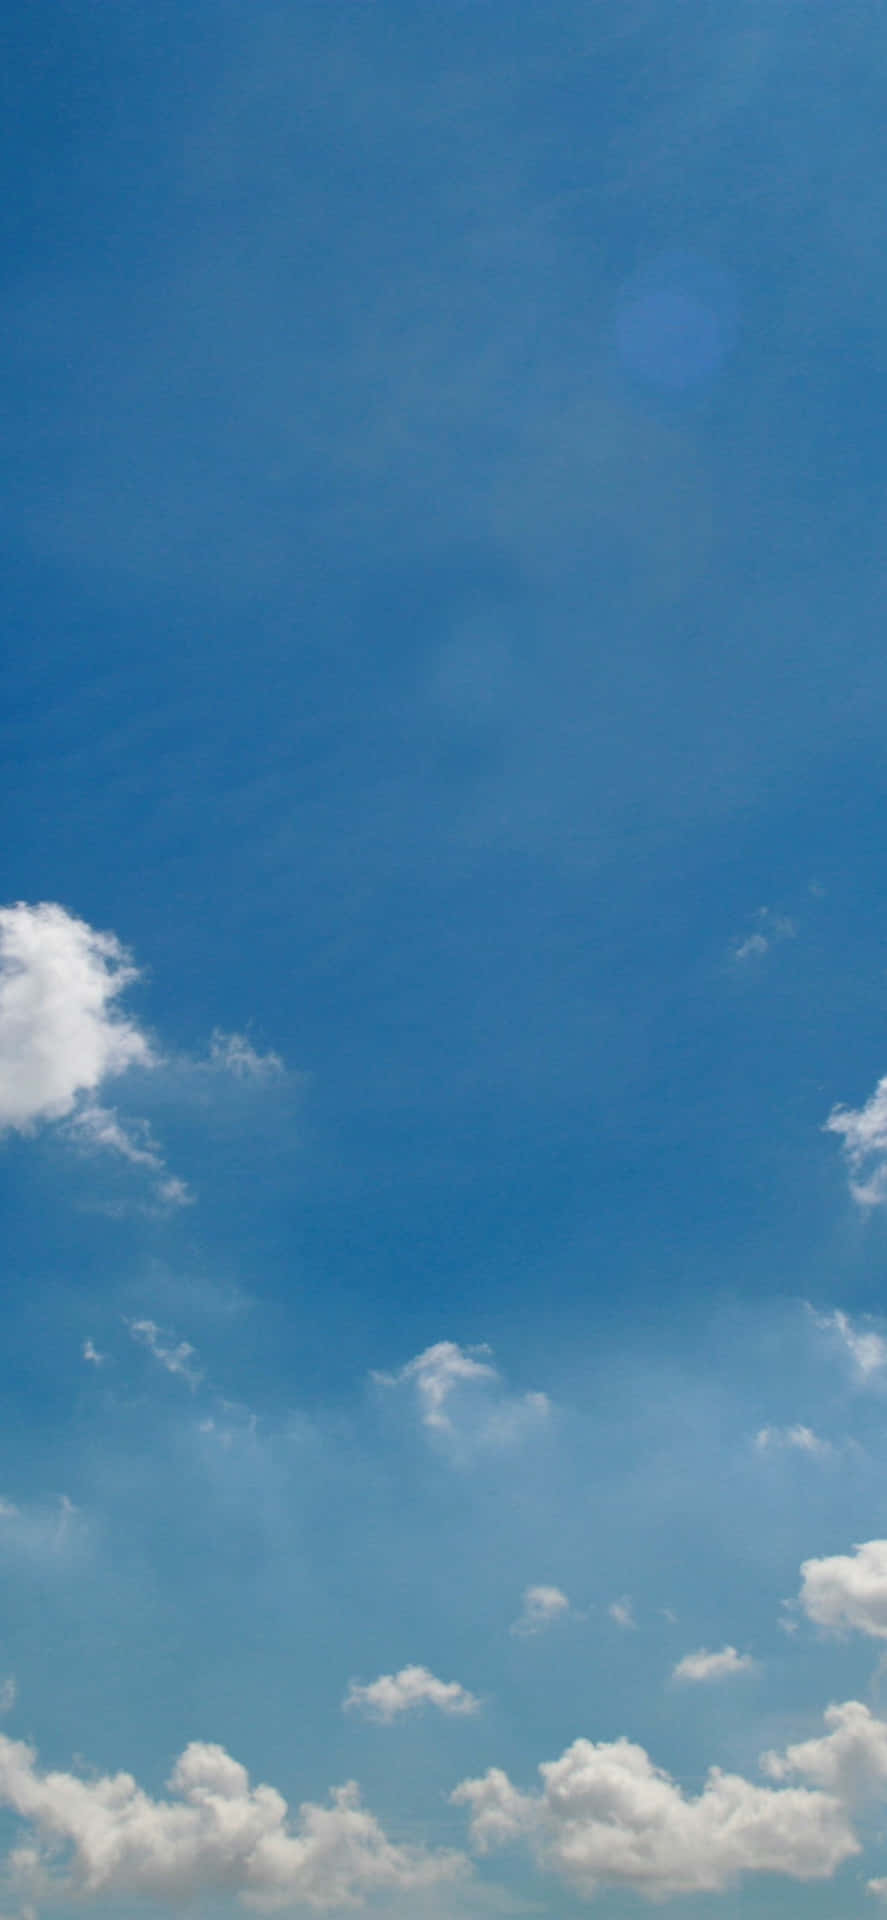 Enjoy the peaceful blue skies with white clouds Wallpaper